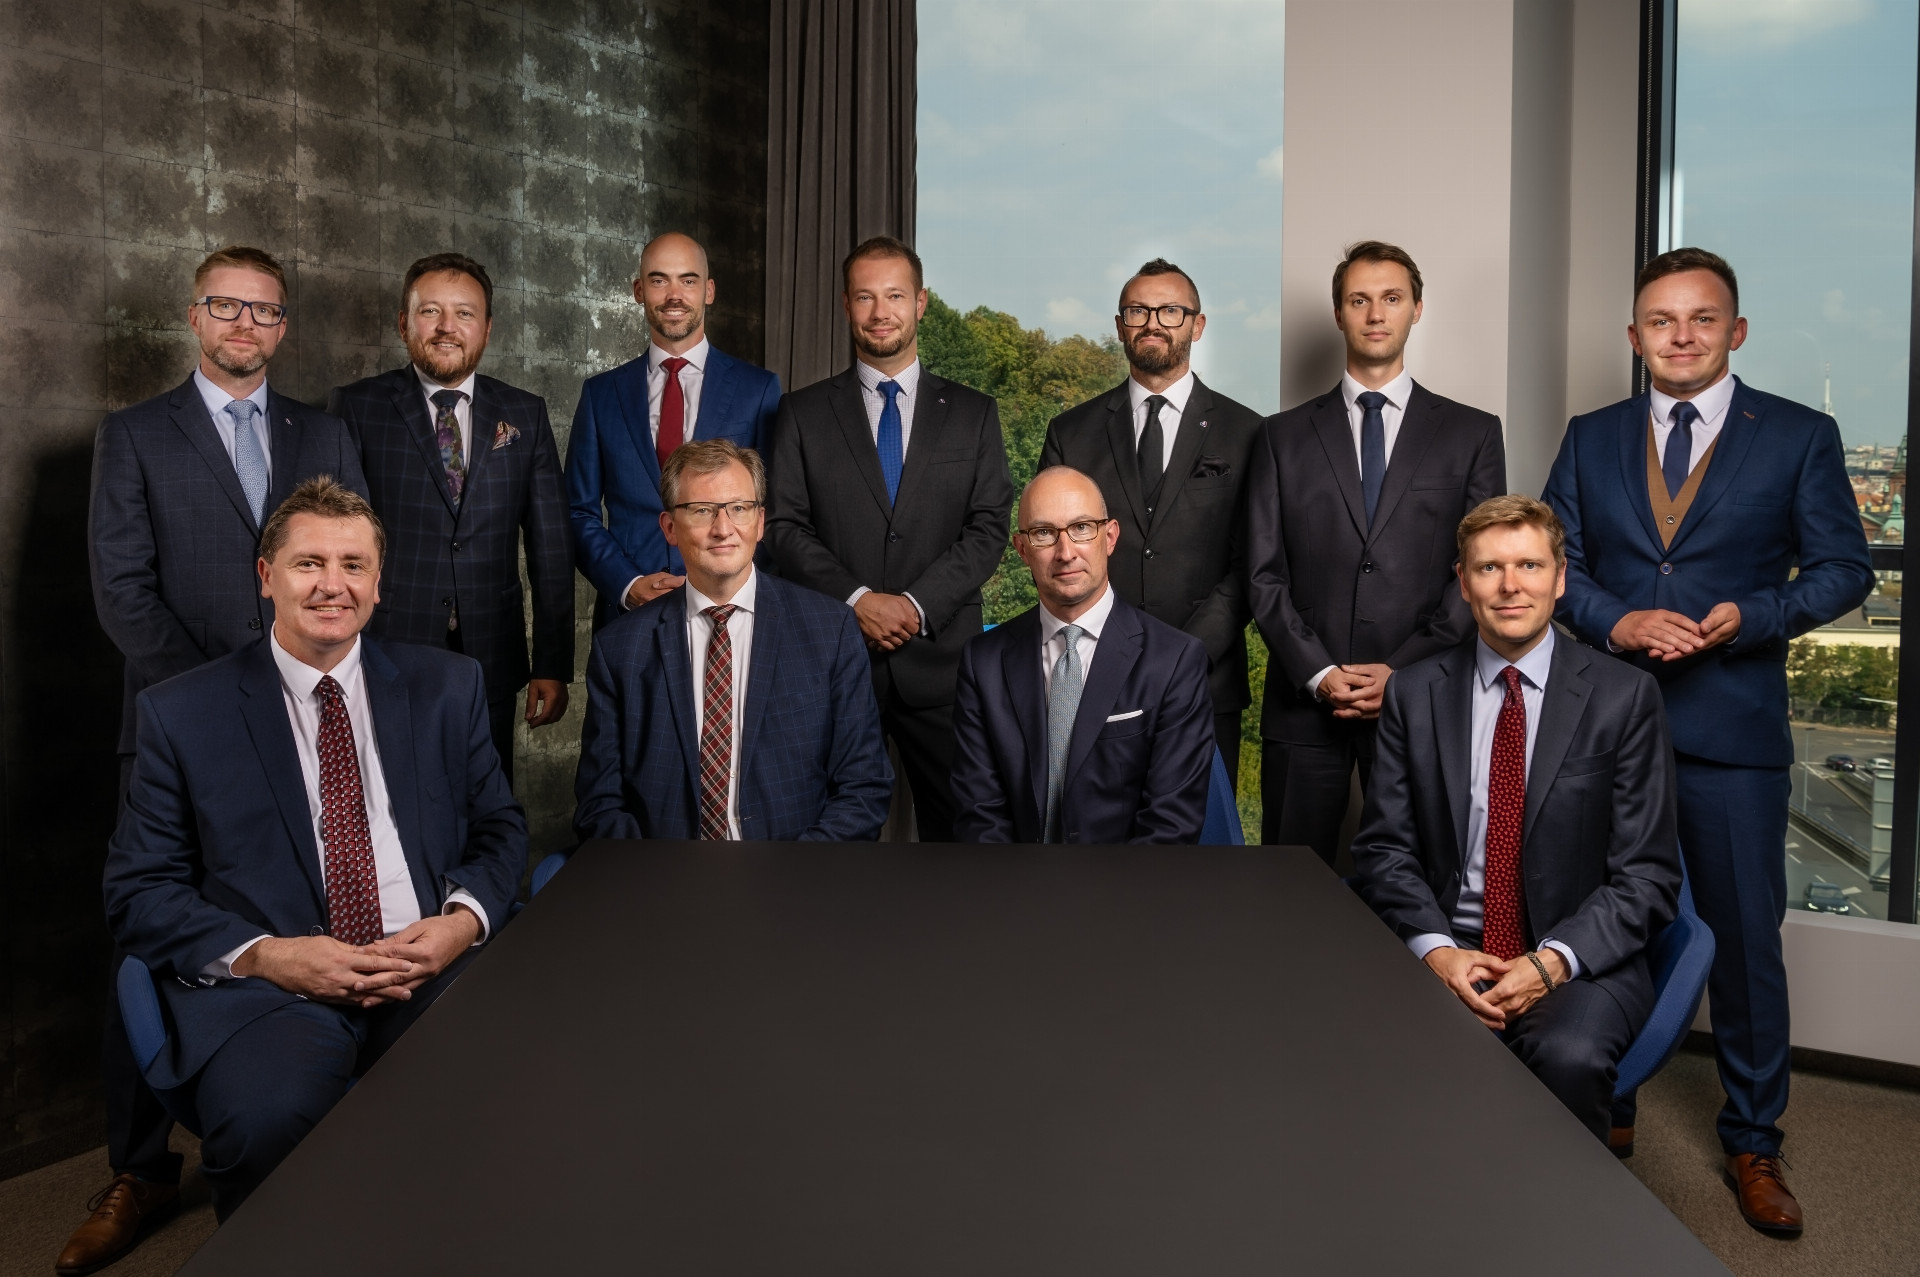 ETL Group based in Germany acquires a stake in Arrows and plans massive investments in its growth